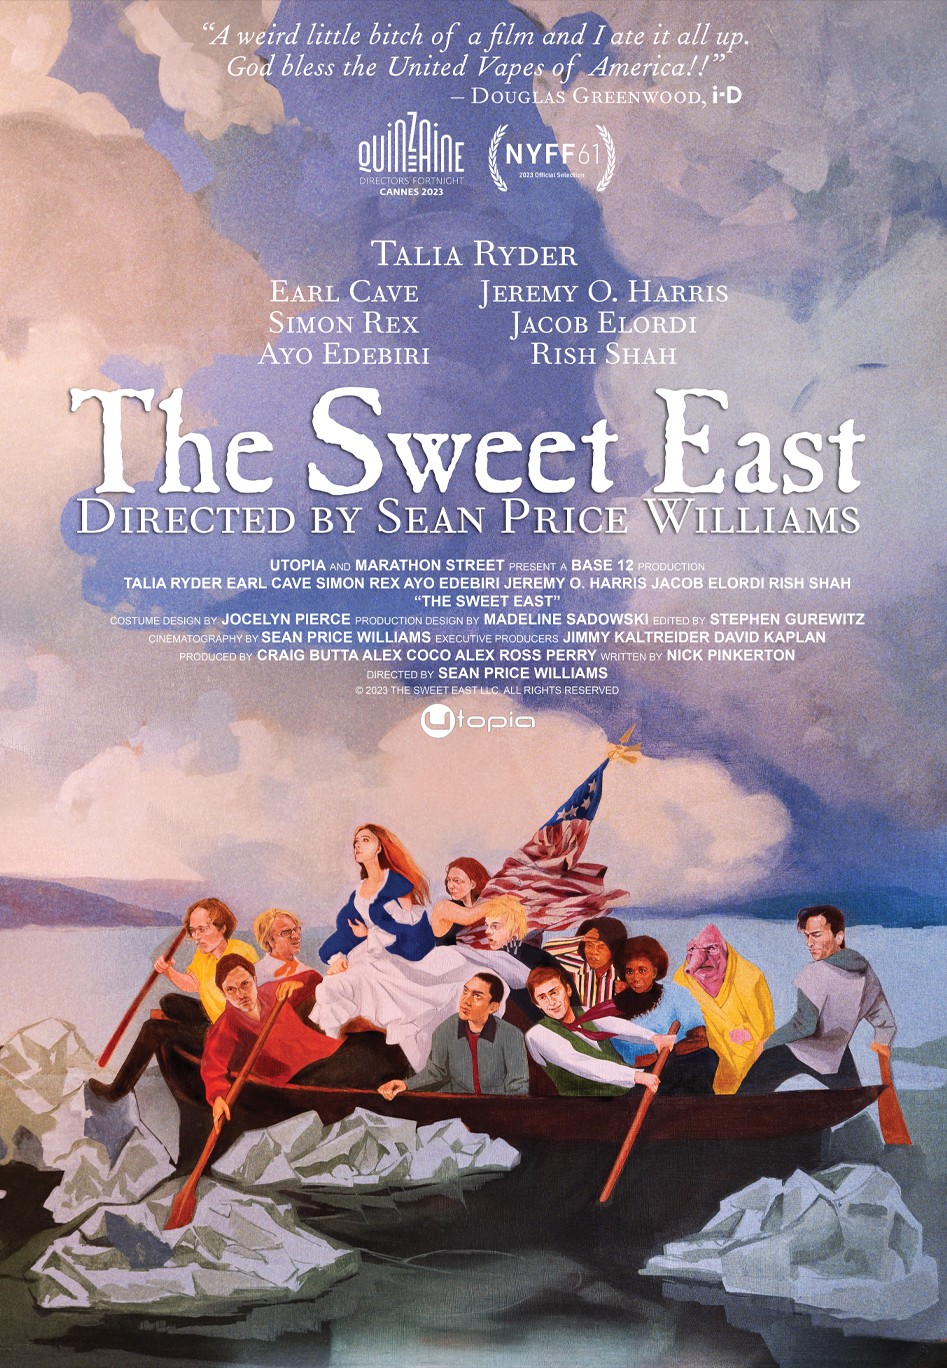 THE SWEET EAST